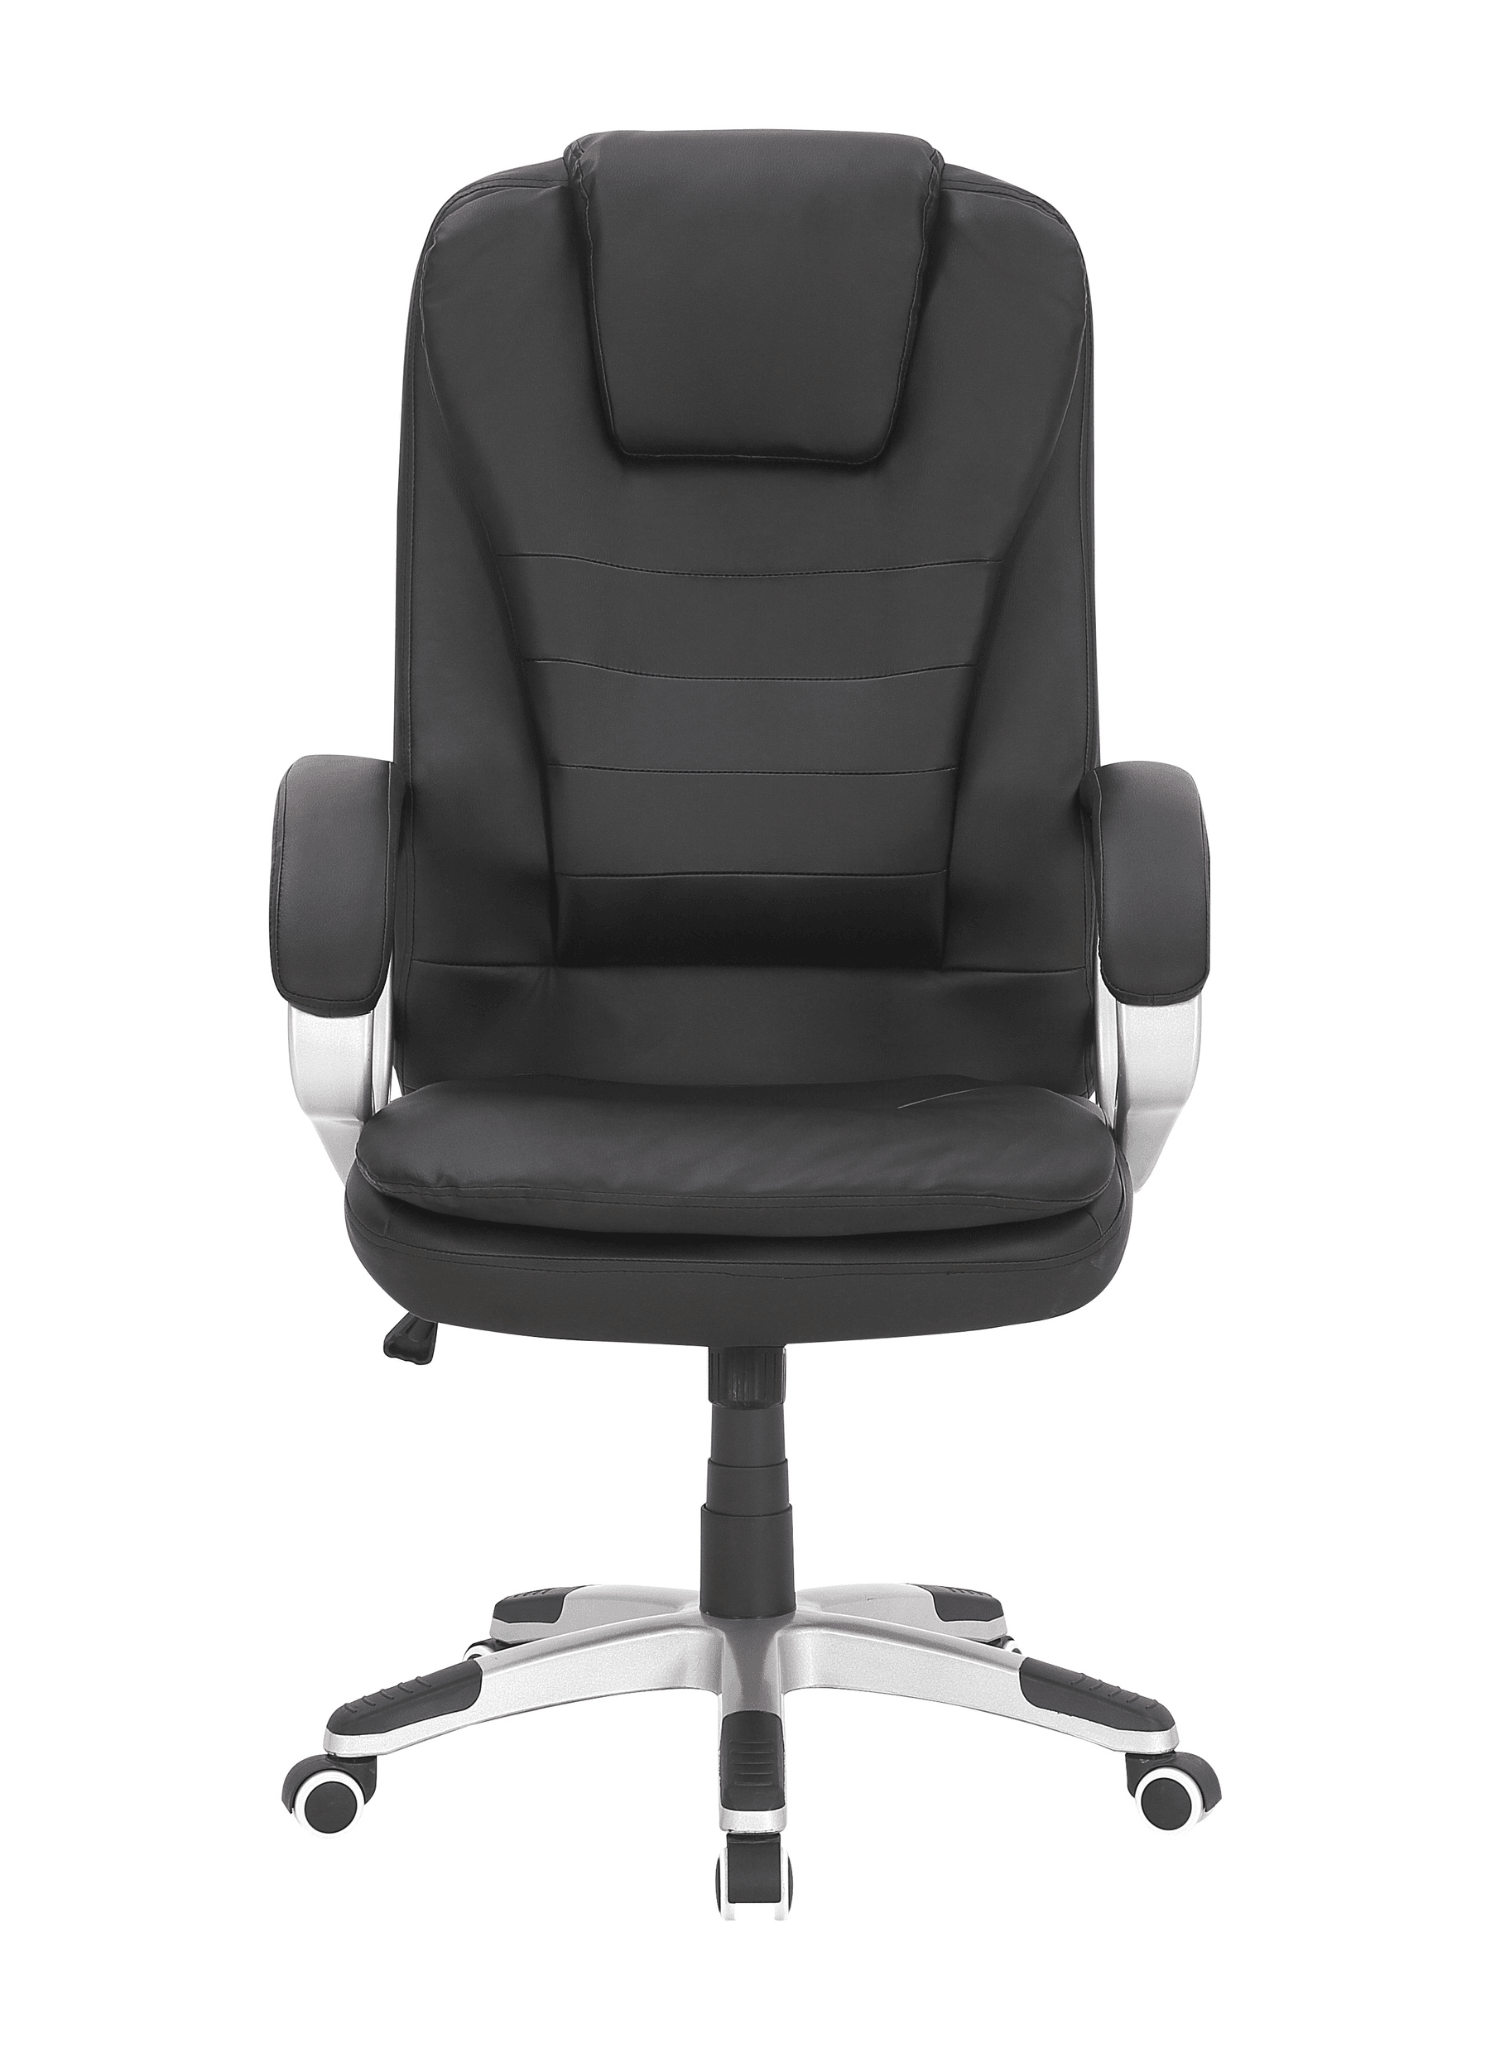 Calypso Leather Office Chair - Black PU Leather - Adjustable Height - Reclining Feature - Home Office Furniture